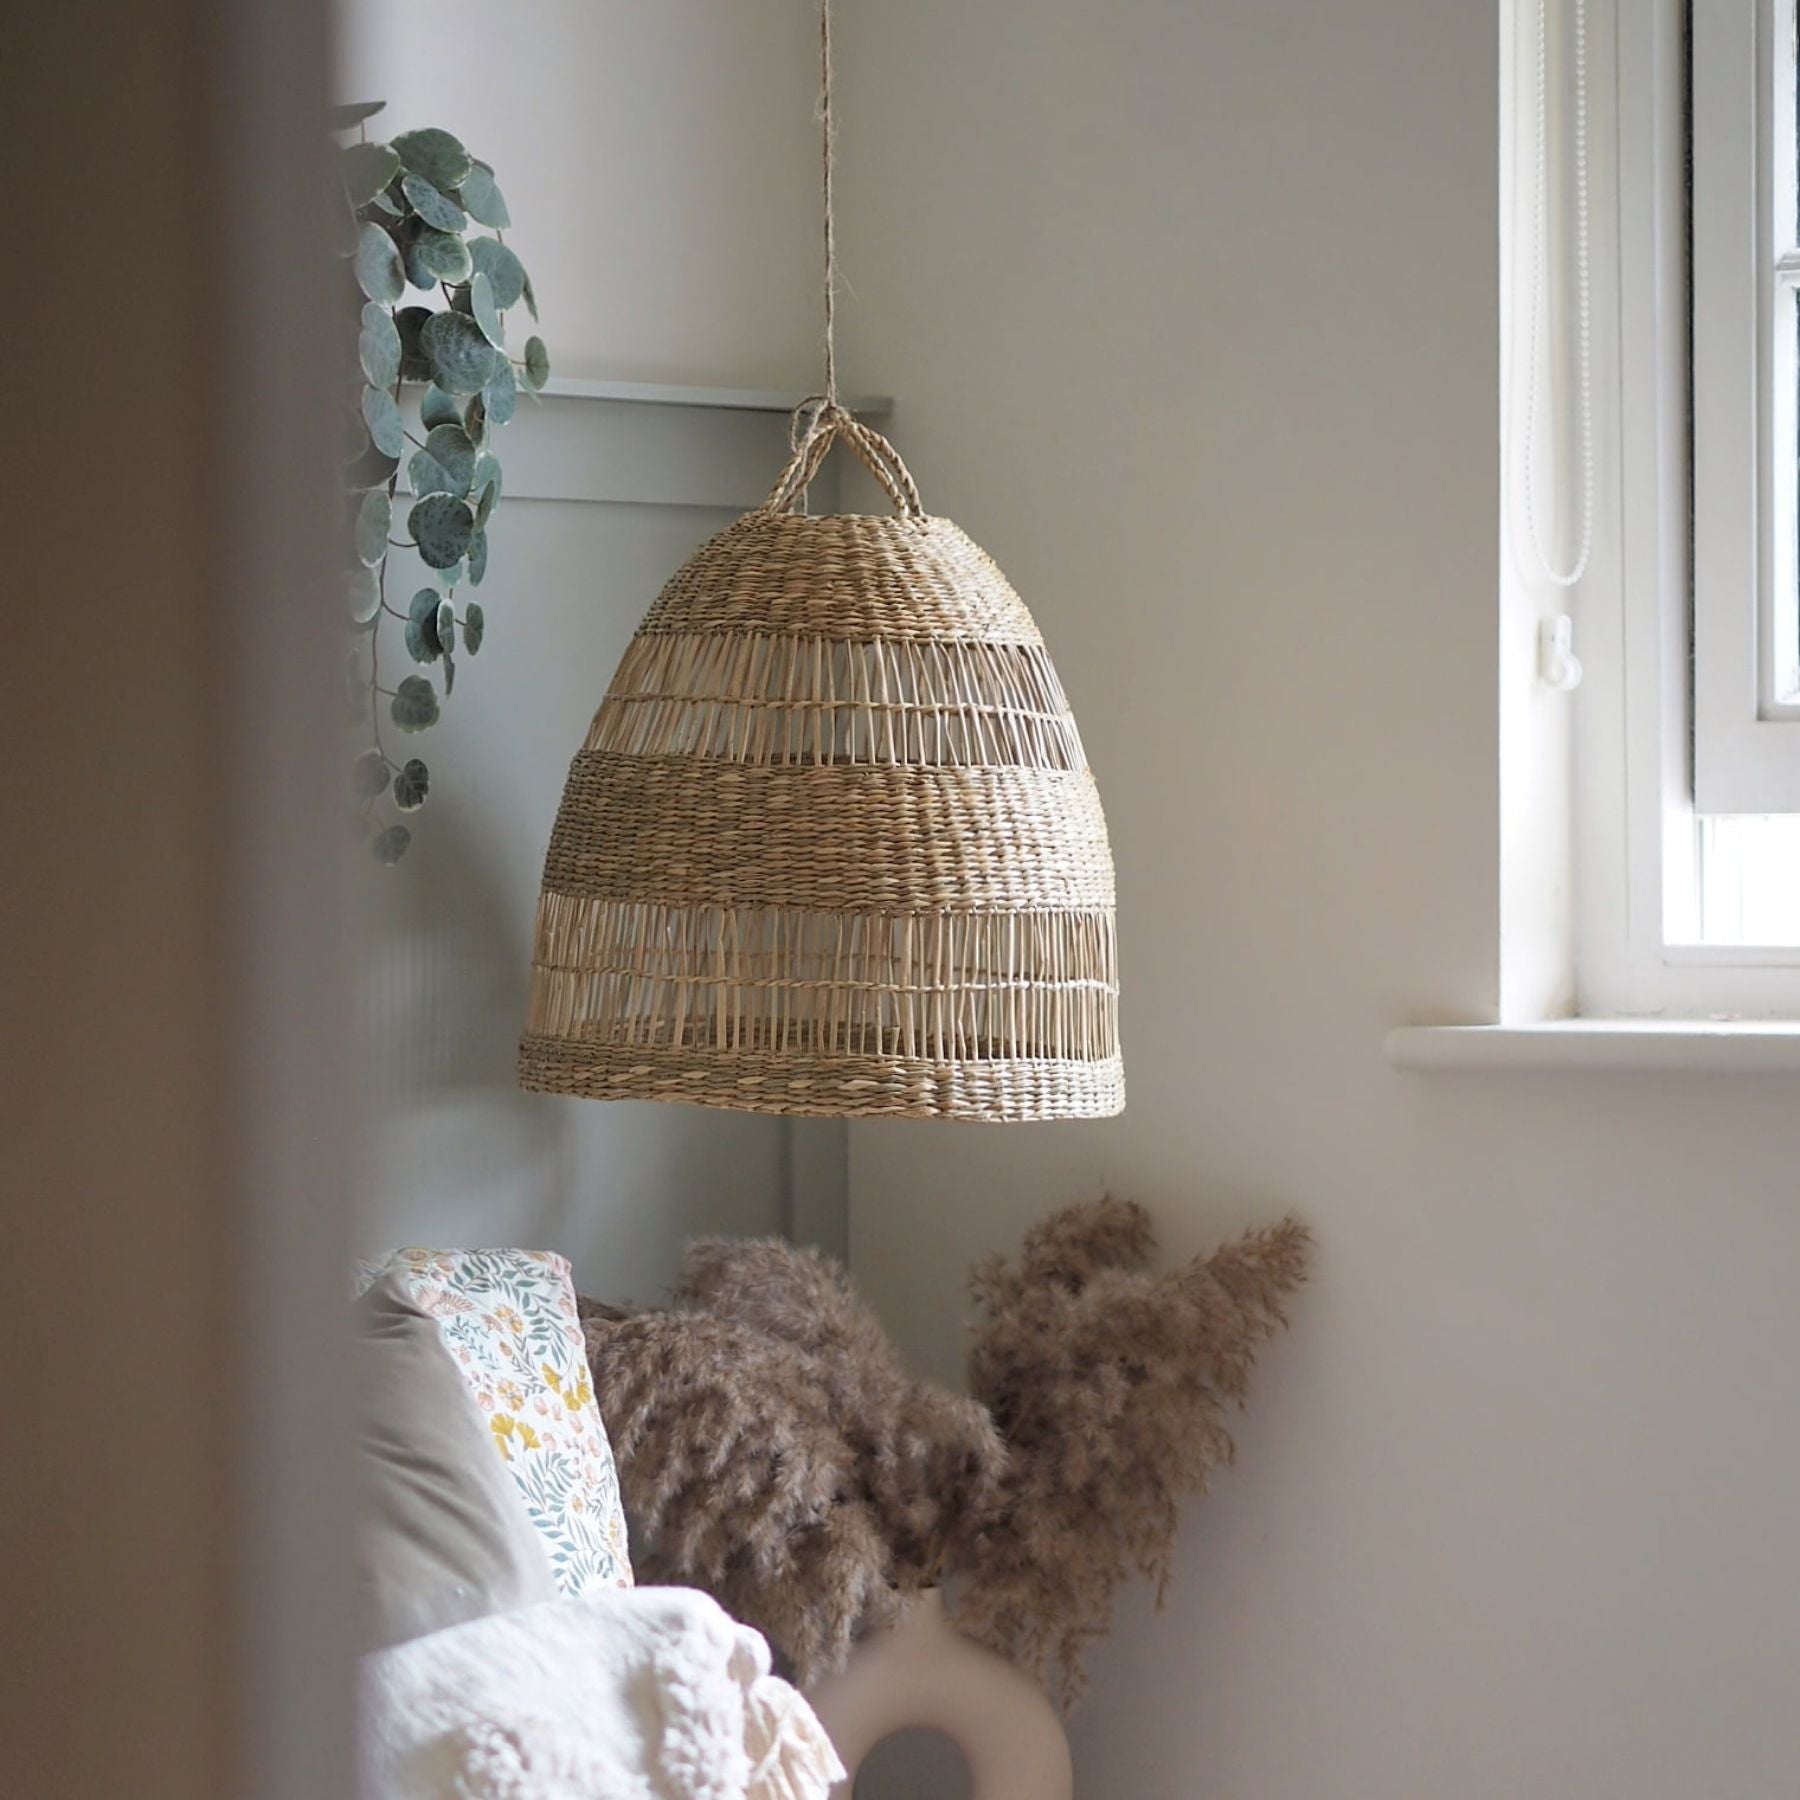 hang this stylish pendant effortlessly with our instructions